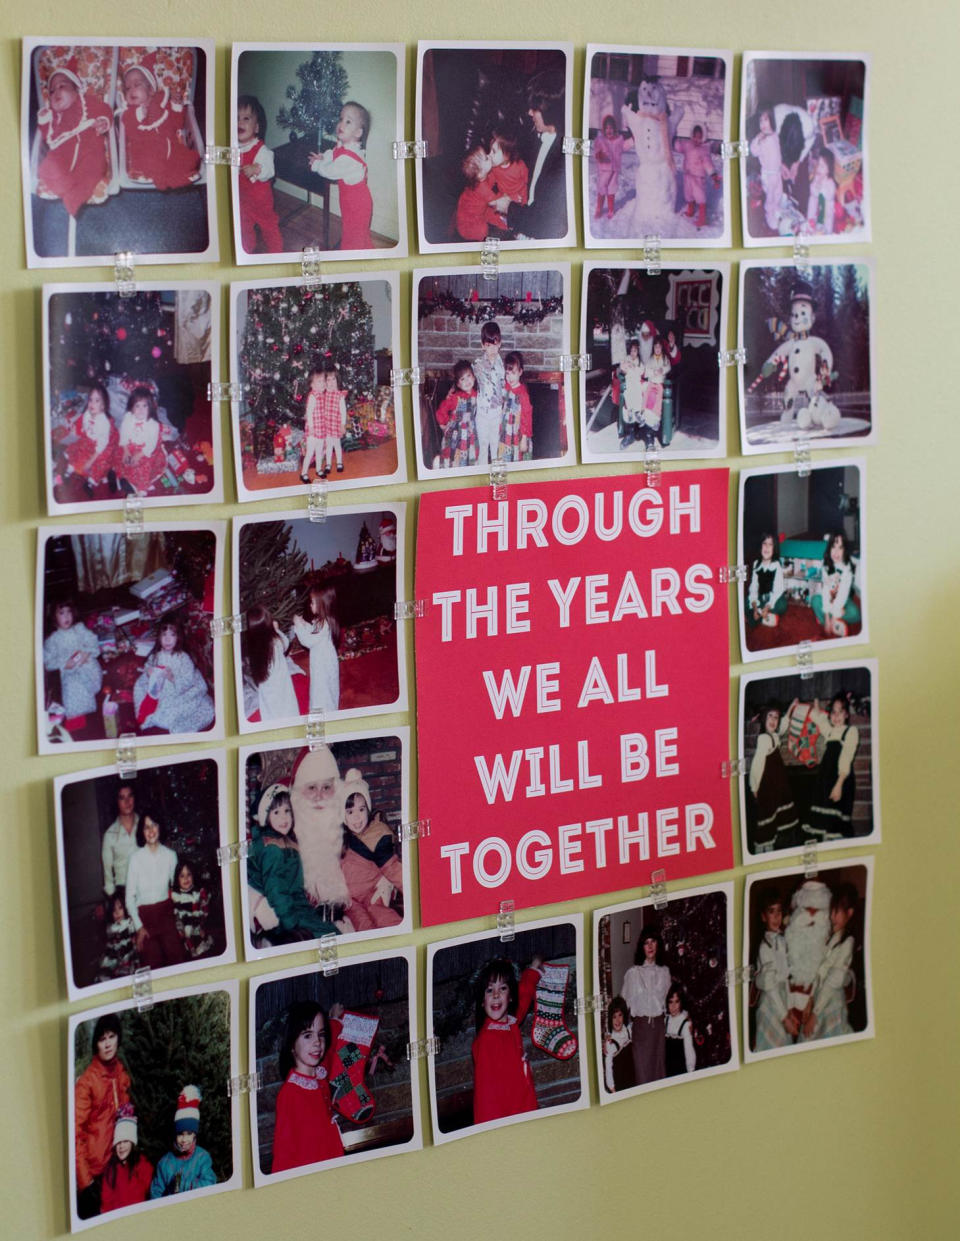 This photo taken on Dec. 2, 2013 shows a display that features family holiday photos and a snippet of the song “Have Yourself a Merry Little Christmas.” Small plastic clips make it easy to arrange and display a large number of photos without frames. The holidays are a great time to pull out the old photos and reminisce, but there's no need to huddle around a dusty album. (AP Photo/Holly Ramer)